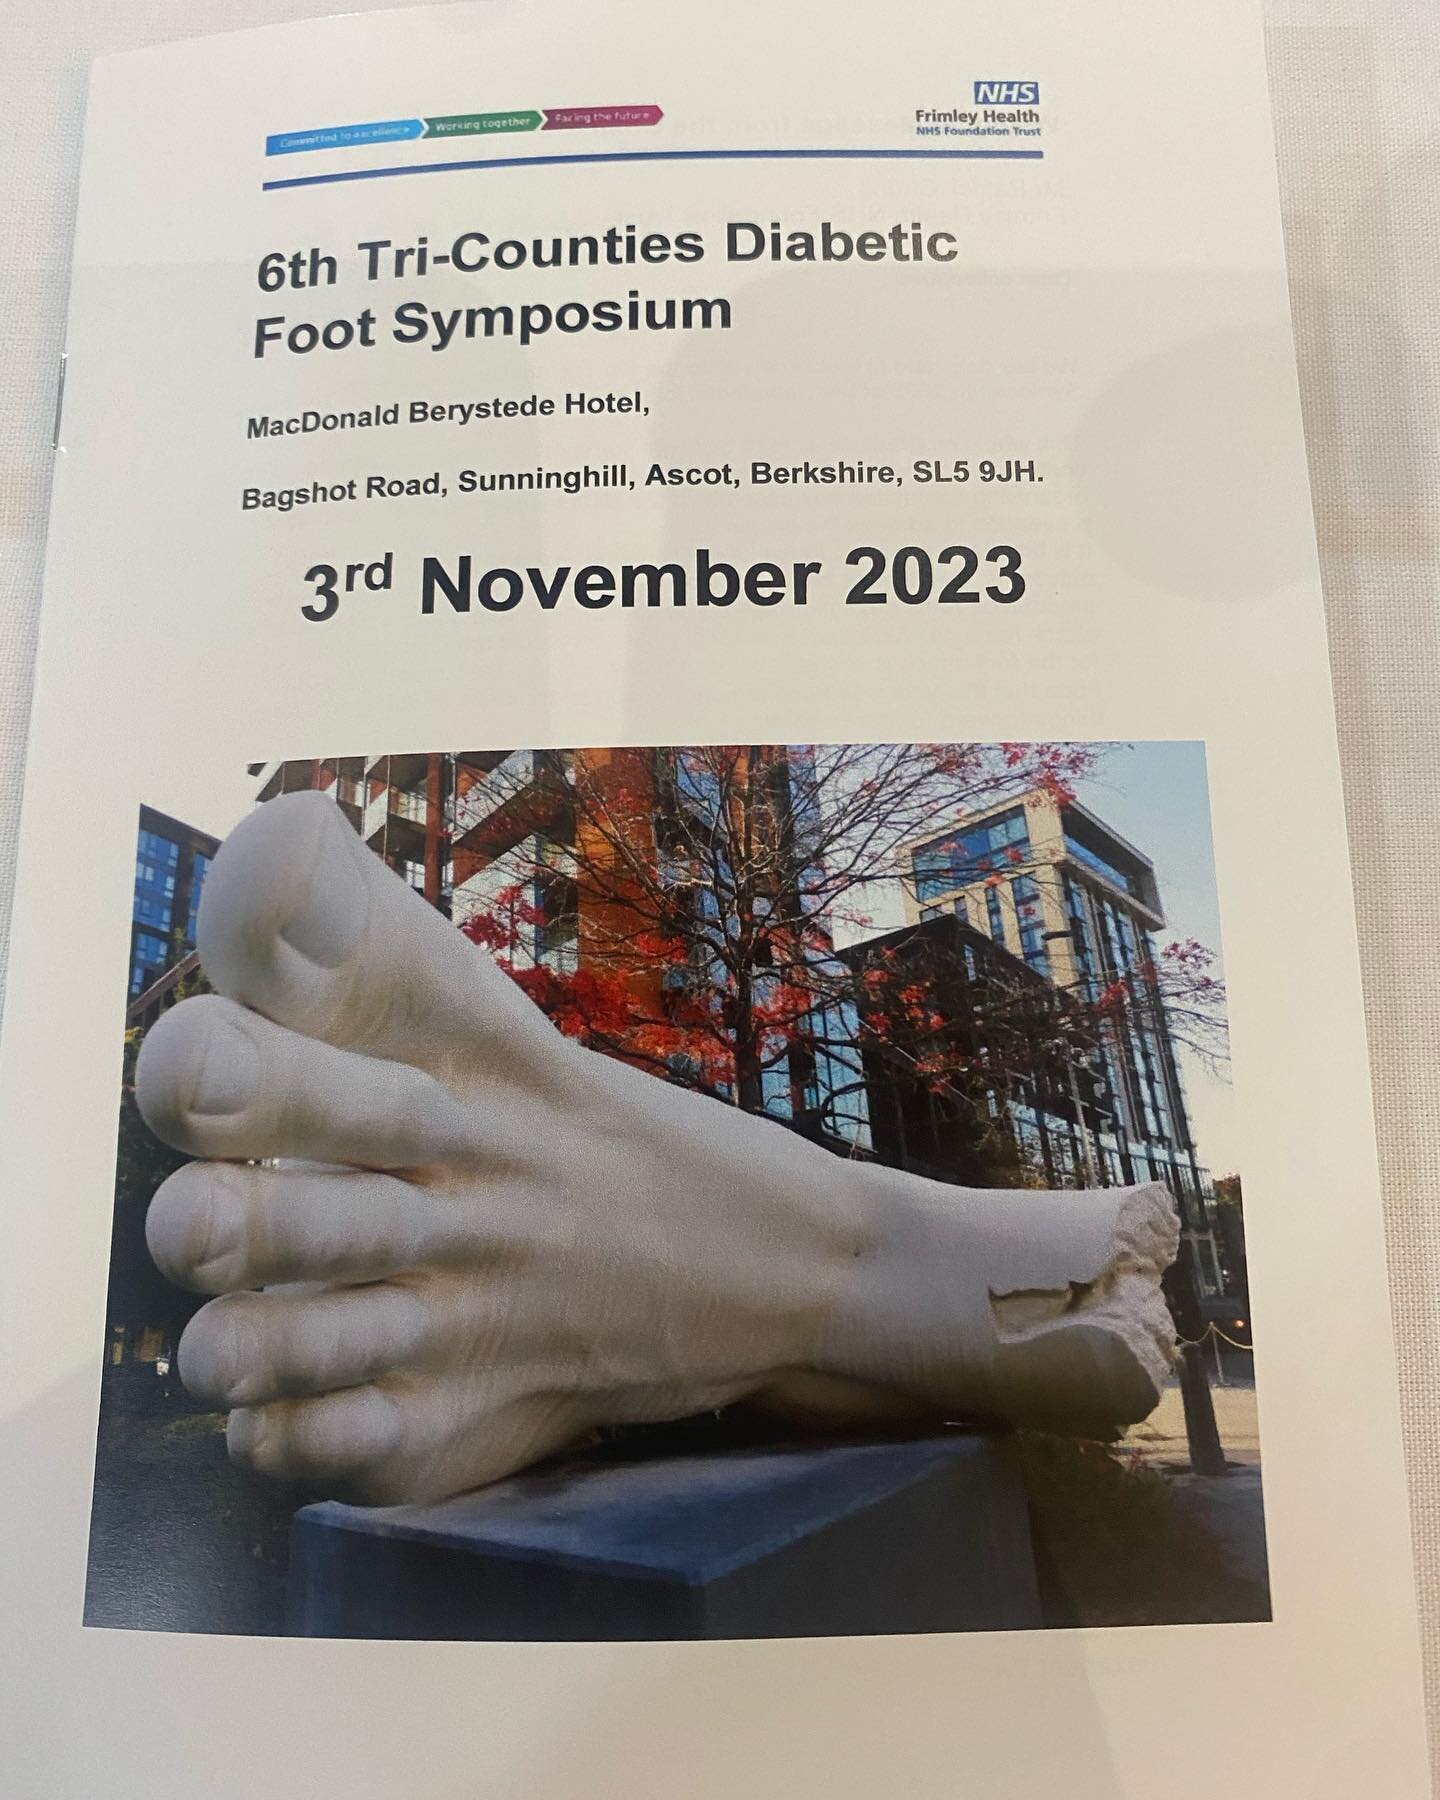 6th Tri-counties diabetic foot symposium- privileged to be asked to present at the event- great day